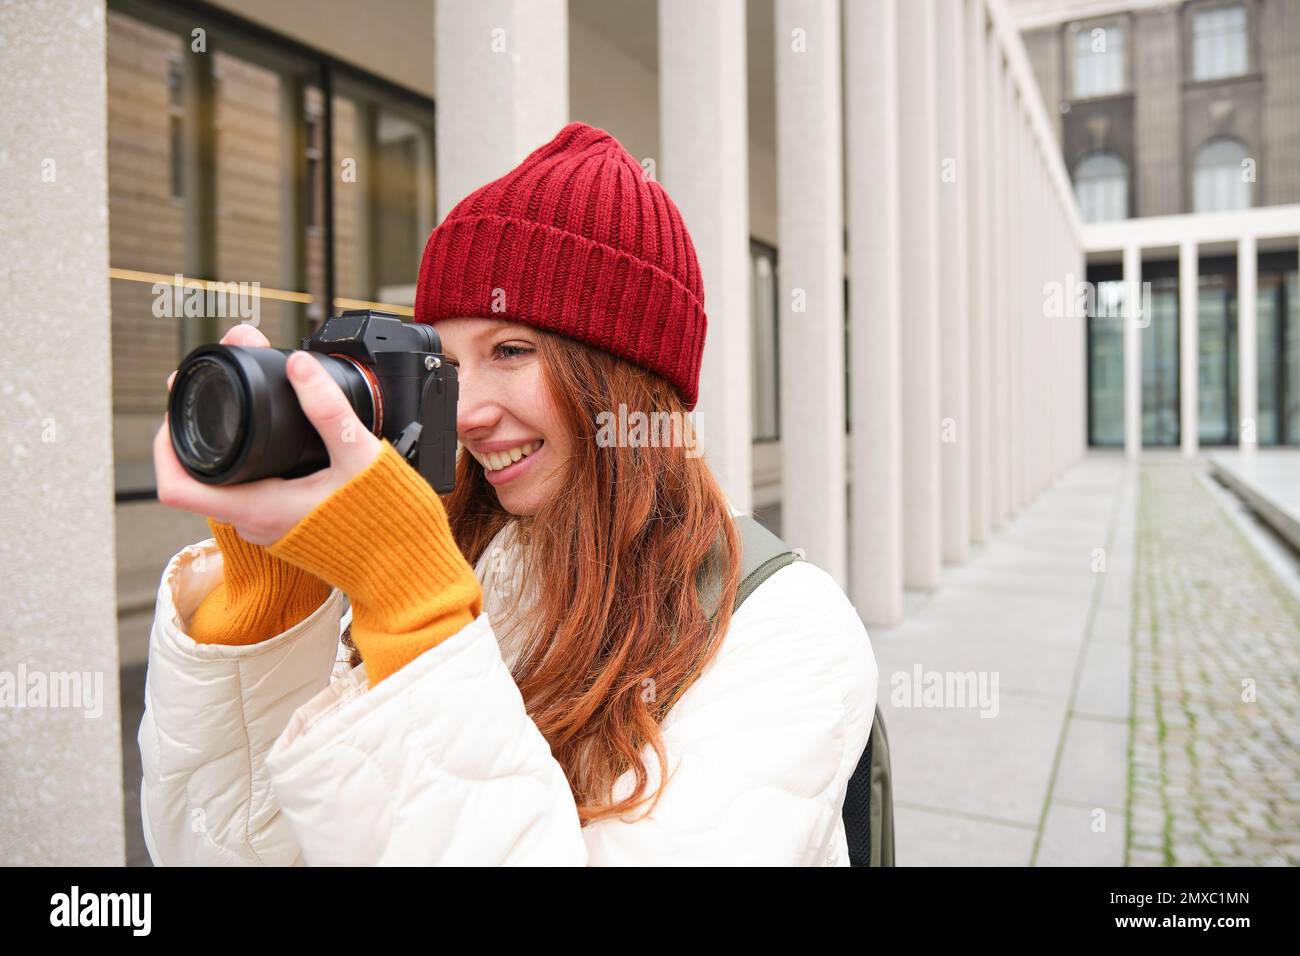 Smiling redhead girl photographer, taking pictures in city, makes photos outdoors on professional camera. Young talent and hobby concept Stock Photo